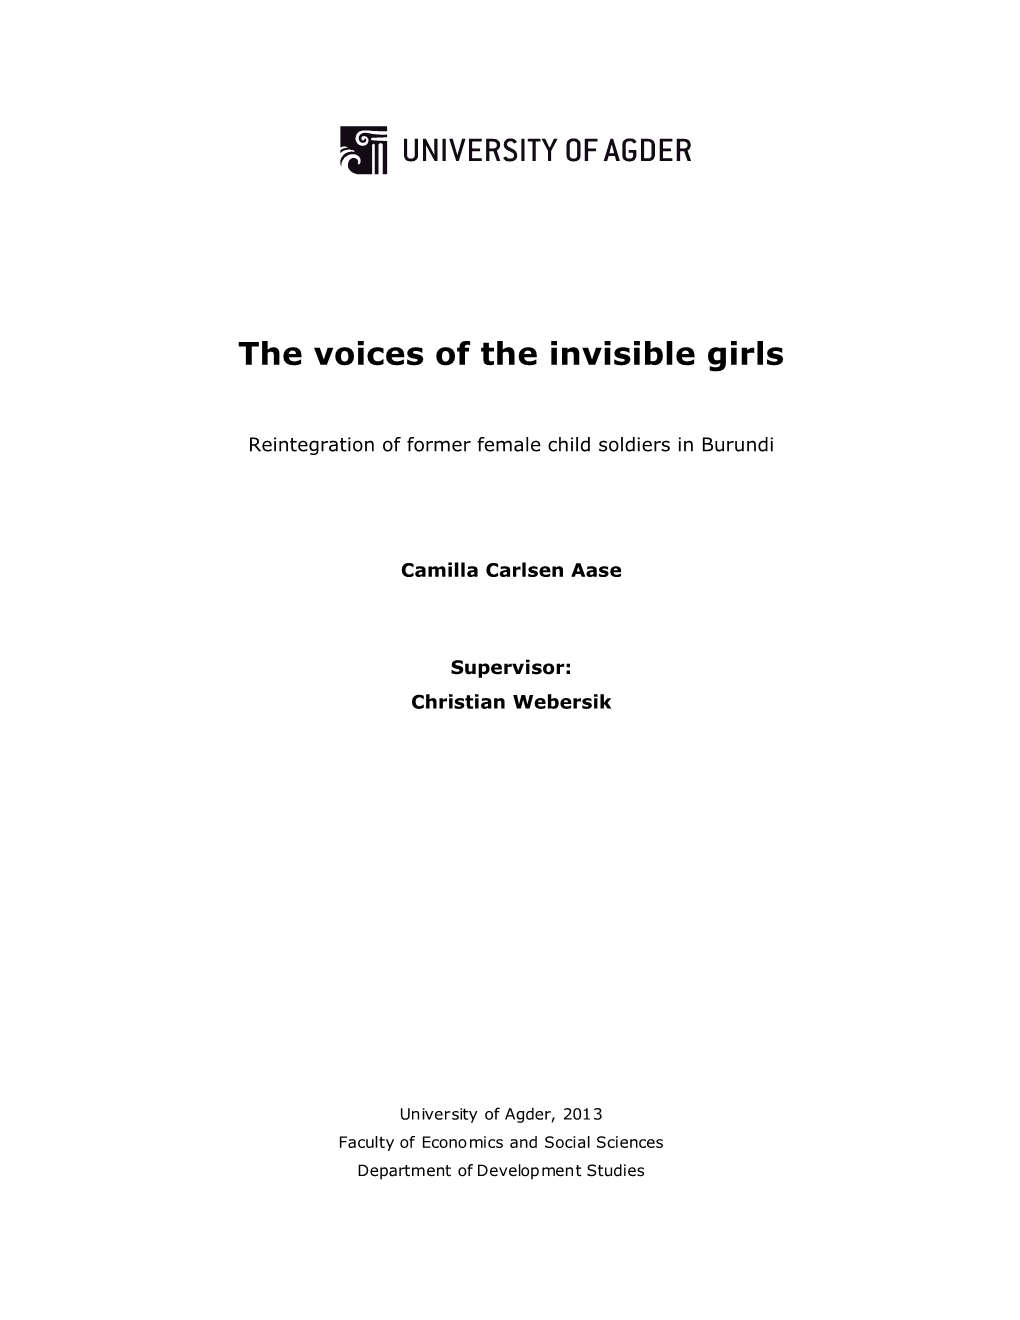 The Voices of the Invisible Girls